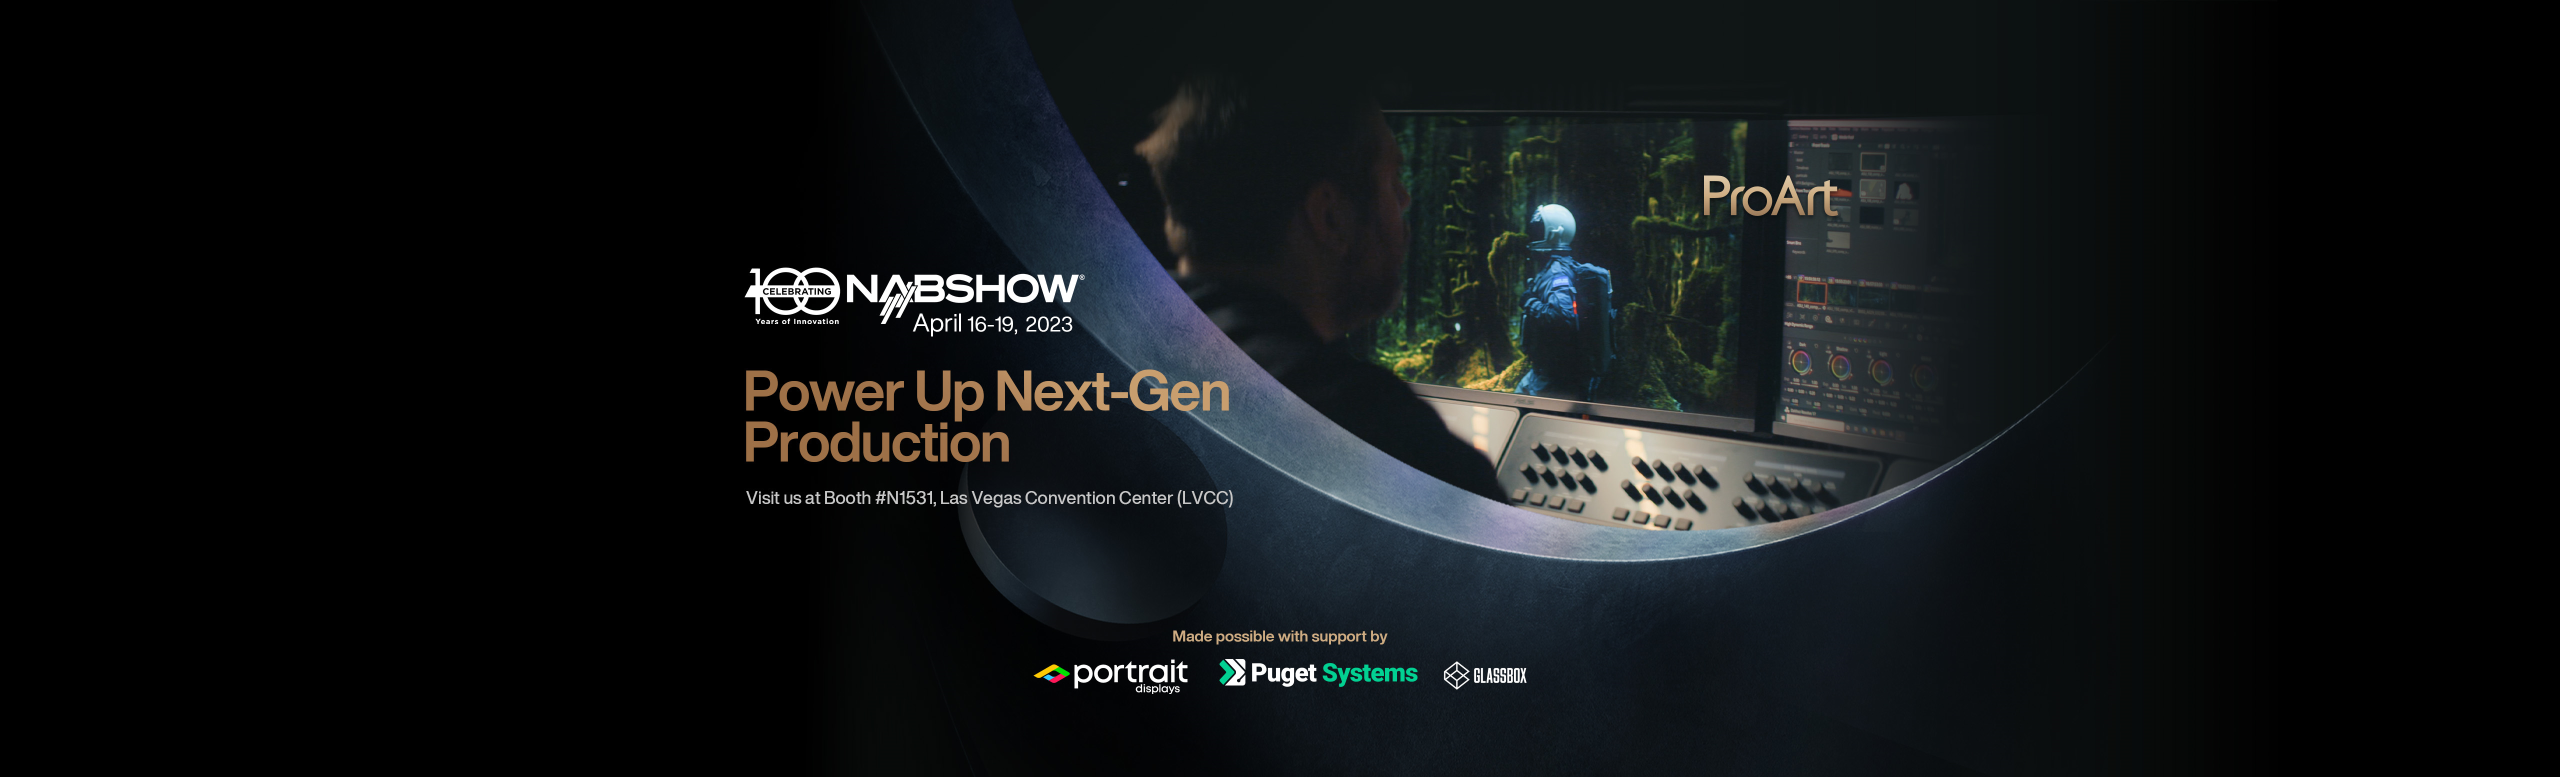 ASUS ProArt at the 2023 NAB Show